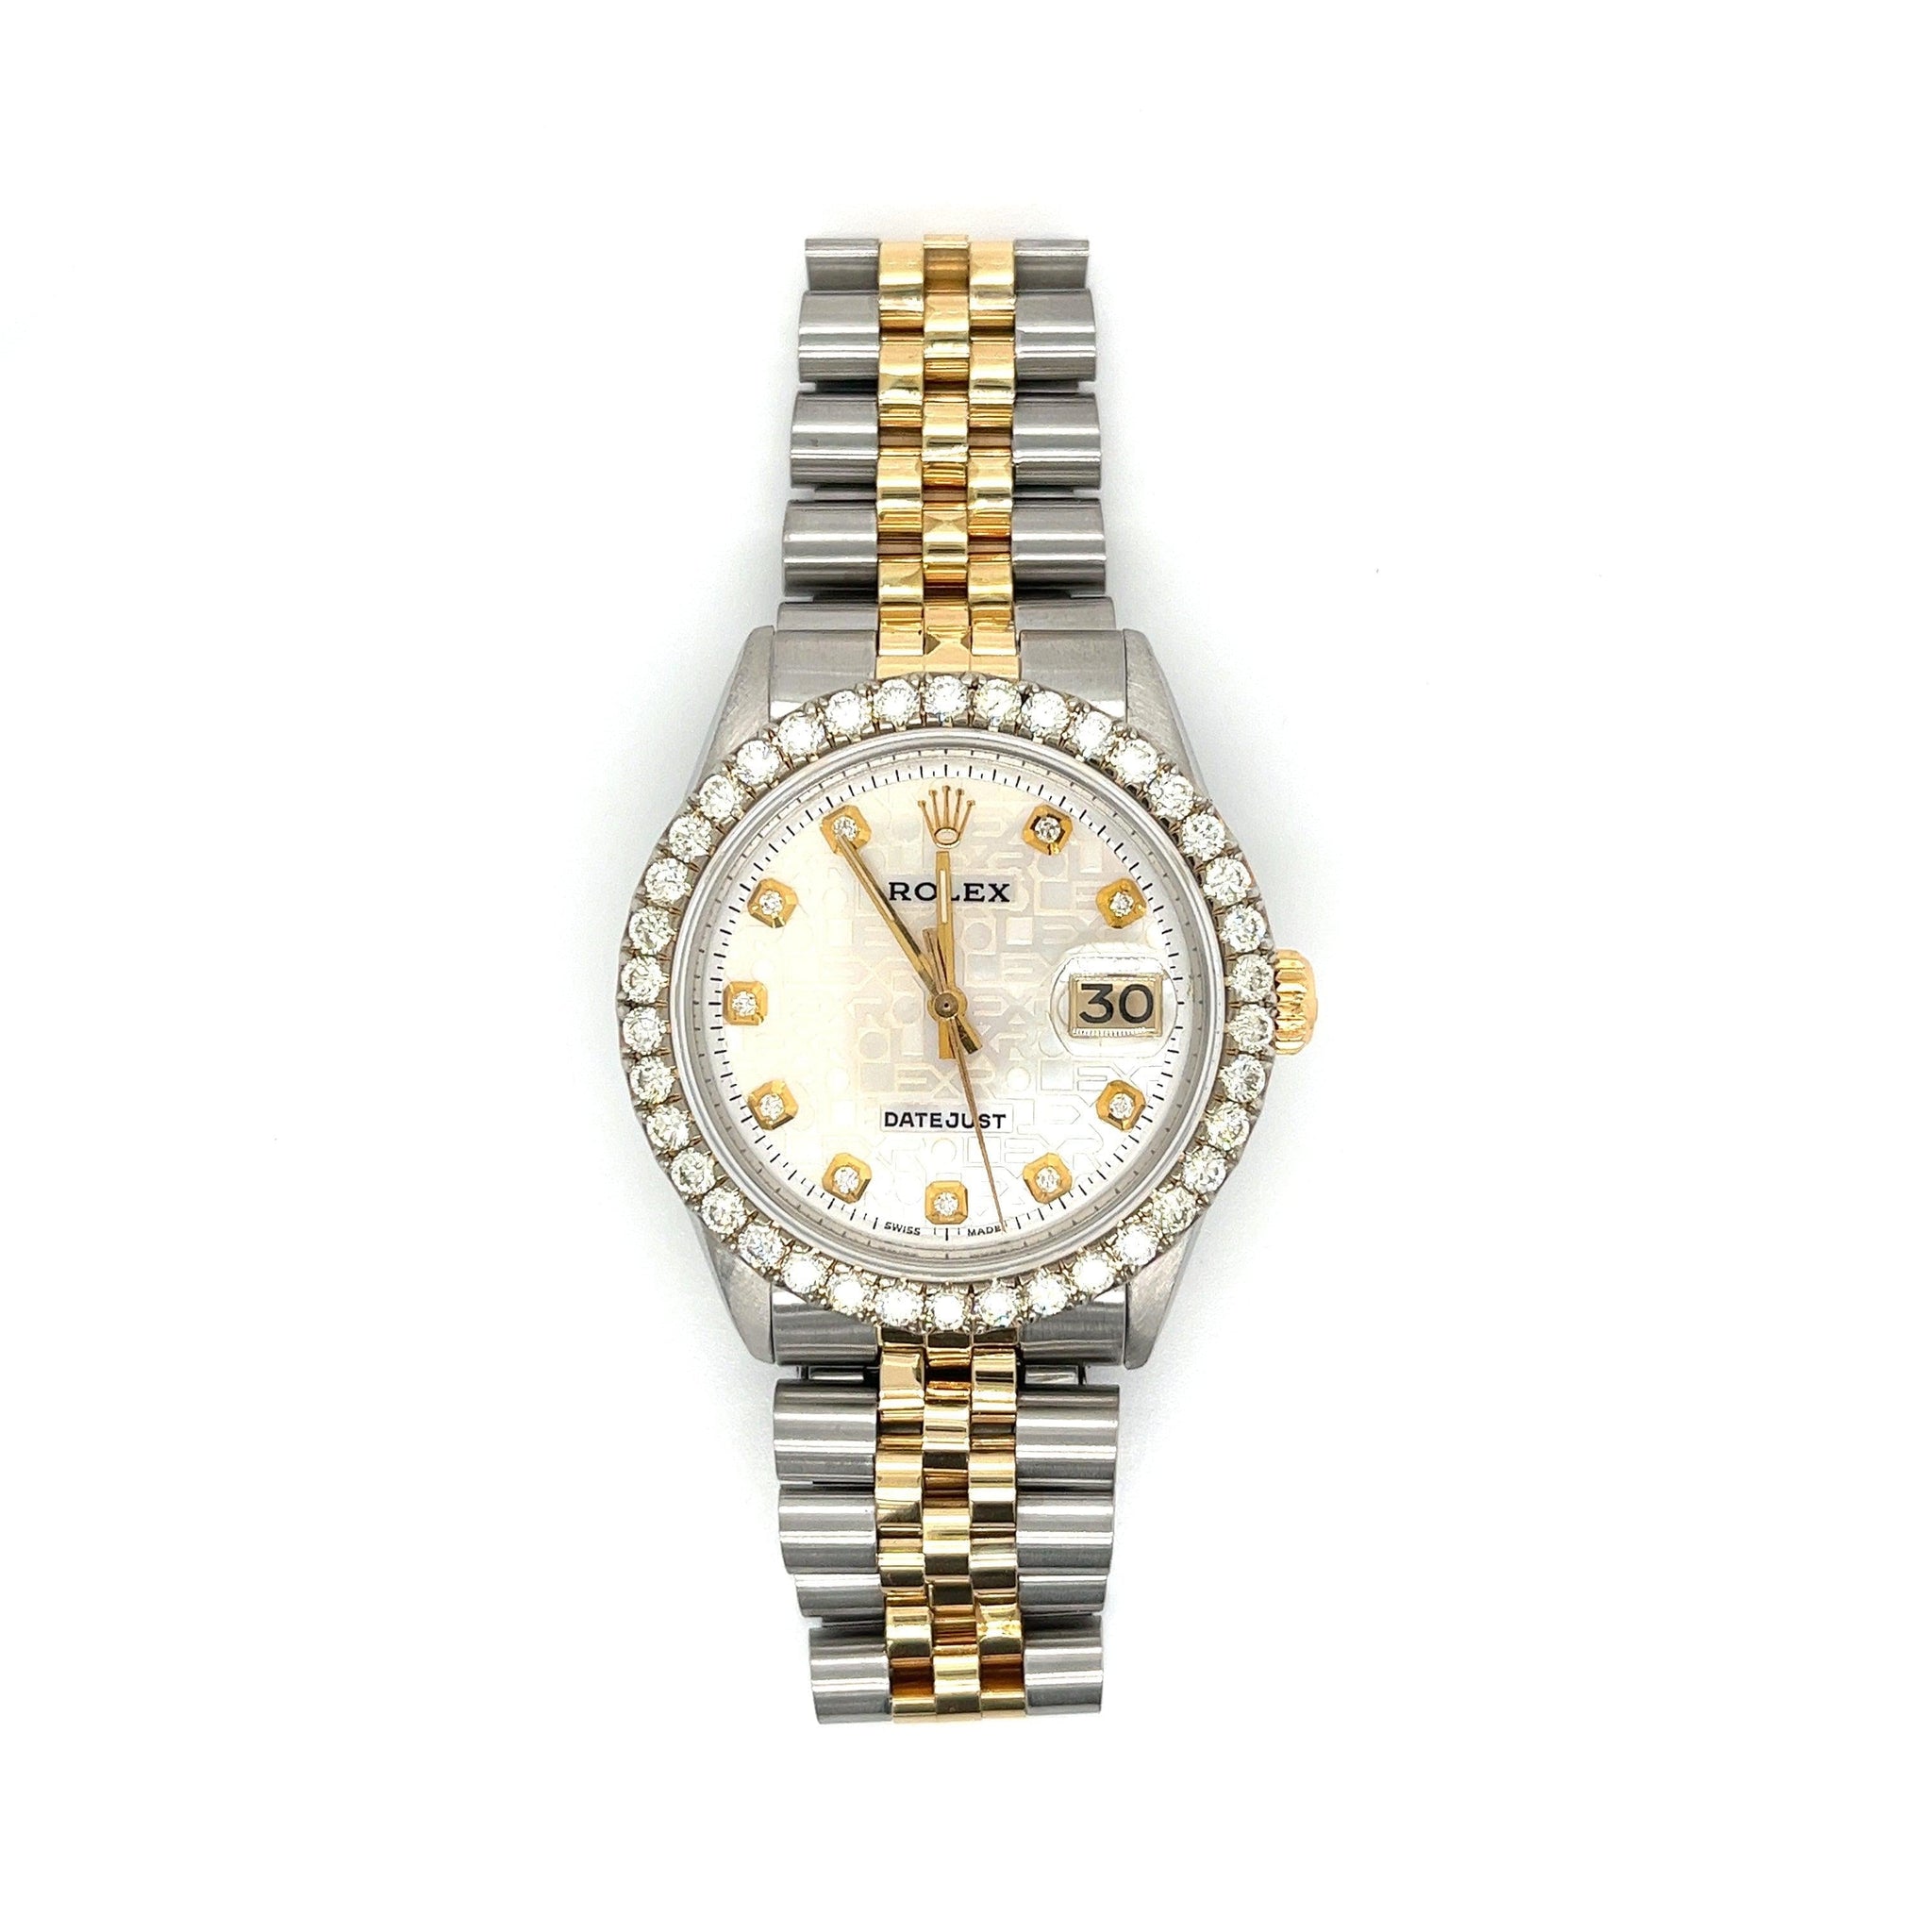 Rolex 36mm DateJust White Jubilee Dial Ref. 1601 With Diamond Bezel-Watches-ASSAY